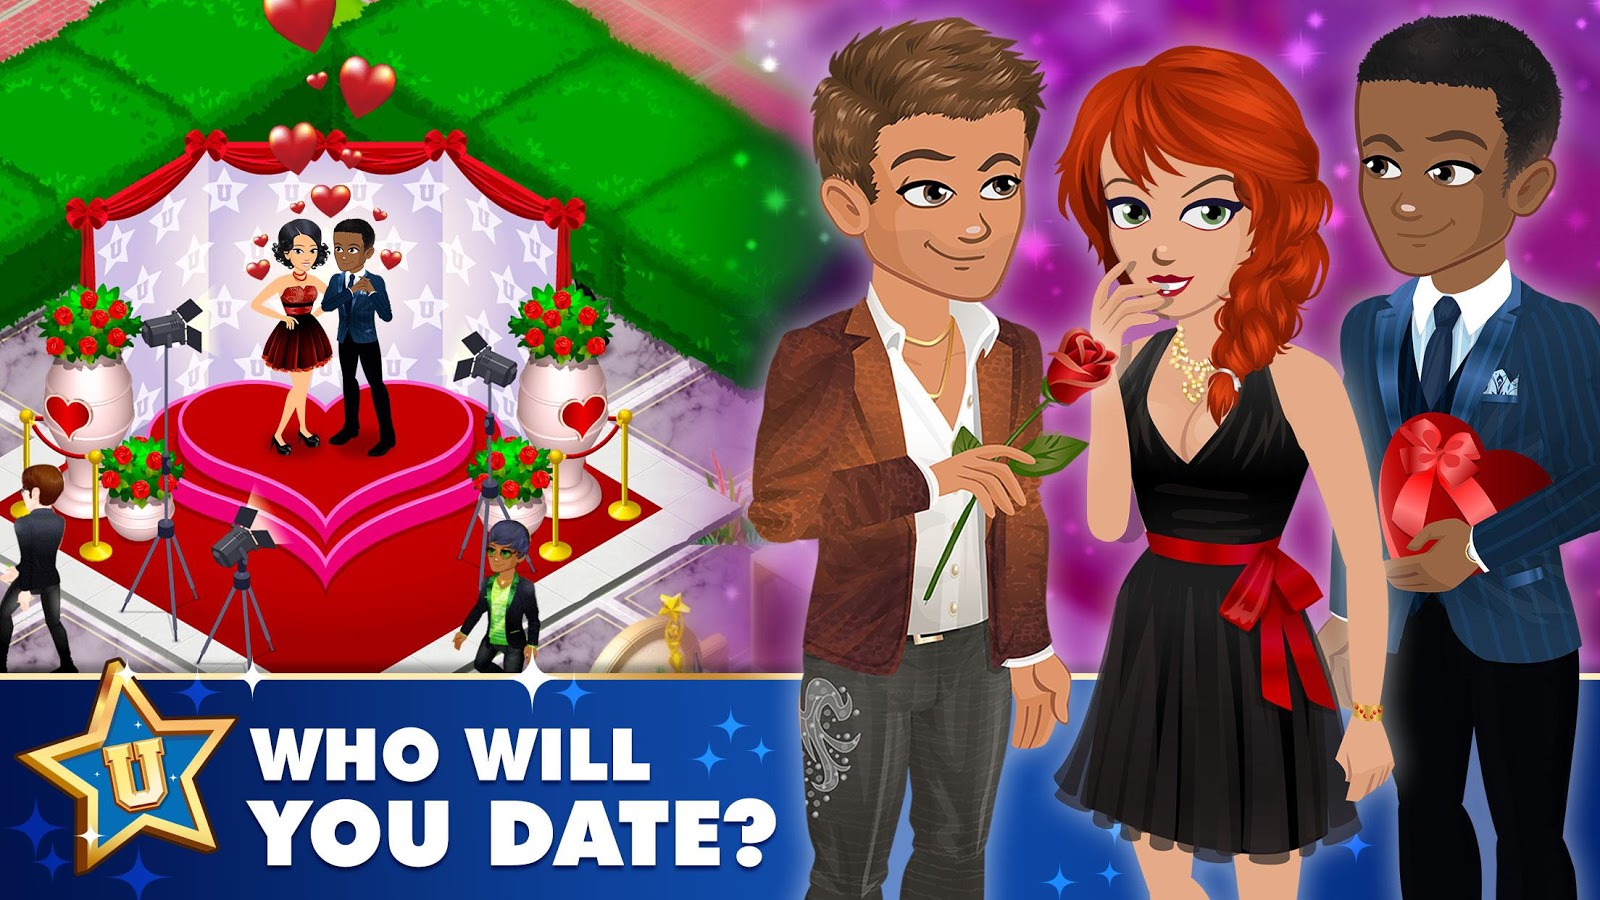 Left, a masc looking person and a femme looking person standing on a heart shaped stage with lights set up surrounded by hedges. Text reads 'Who will you date?'. Right, a femme looking person and two masc looking people turned towards them, one holding a rose and the other holding a heart shaped box.